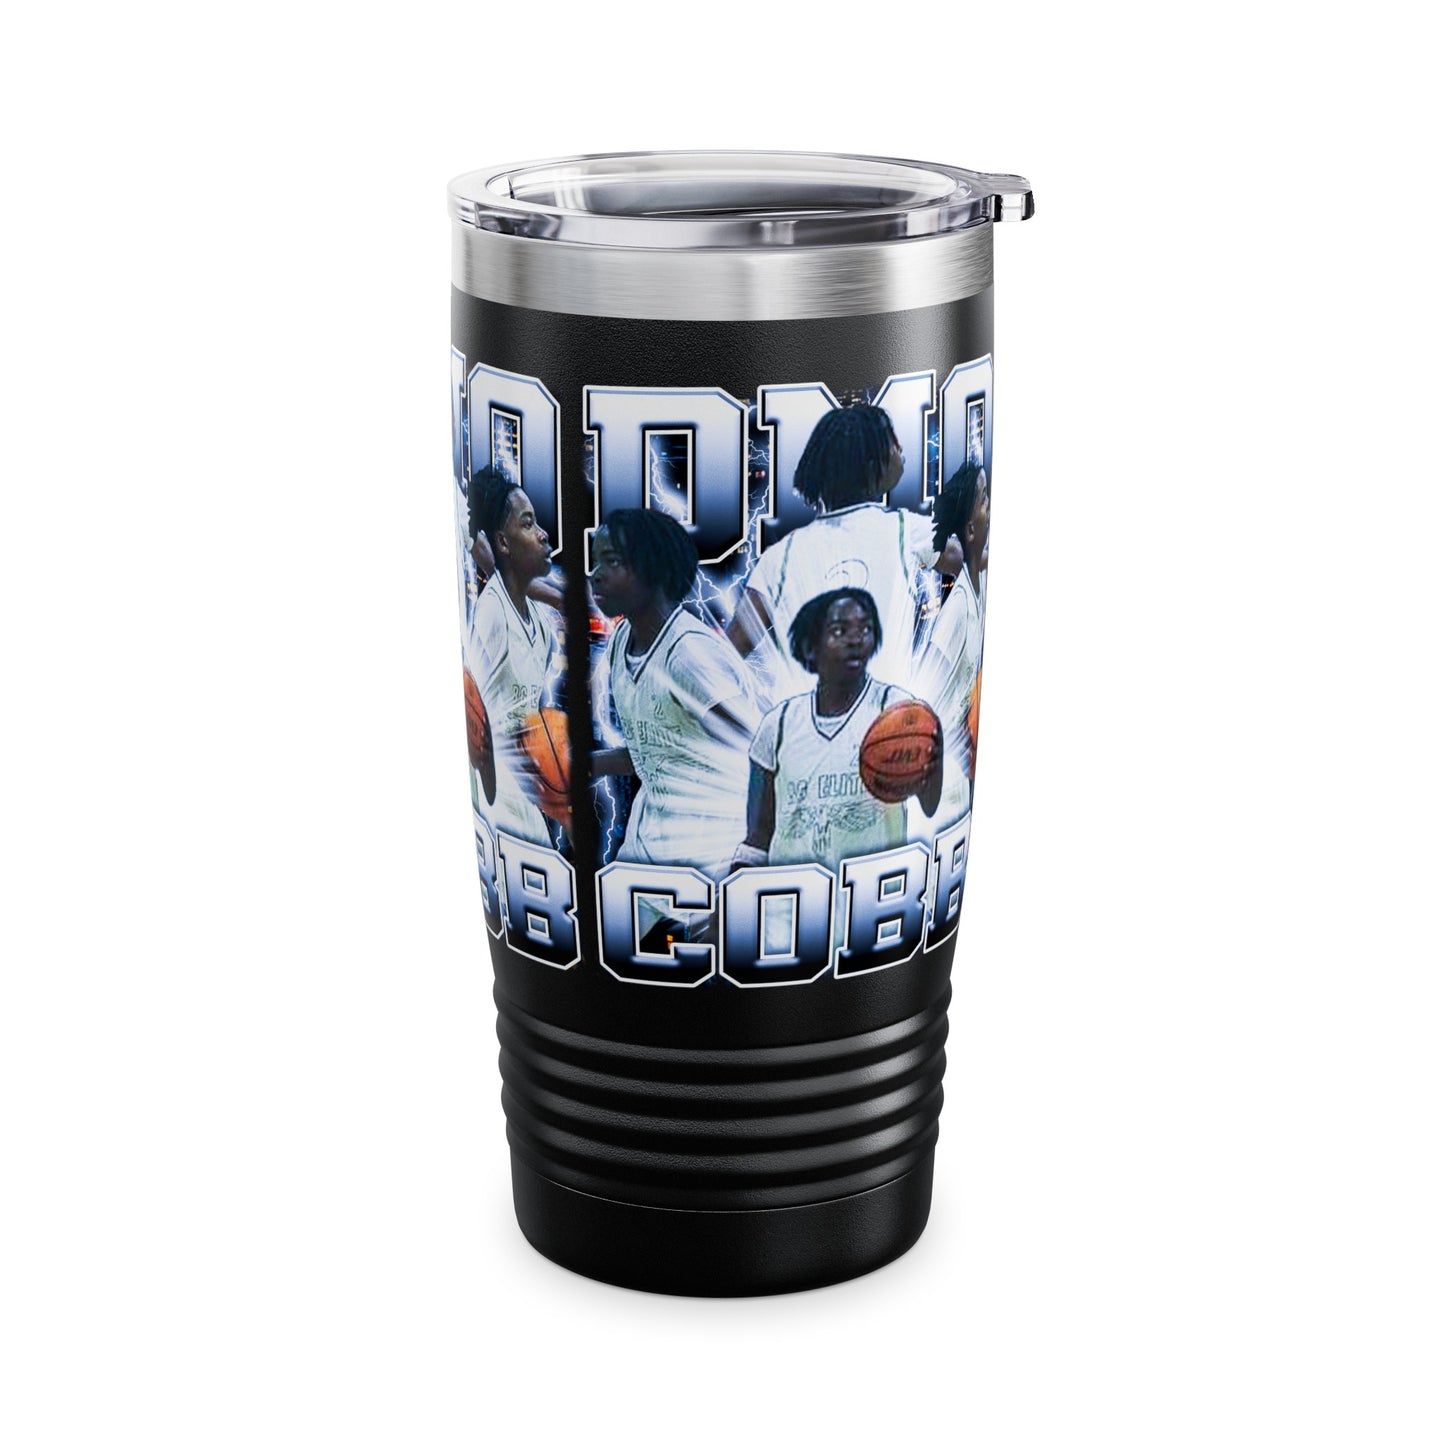 Dmo Cobb Stainless Steal Tumbler